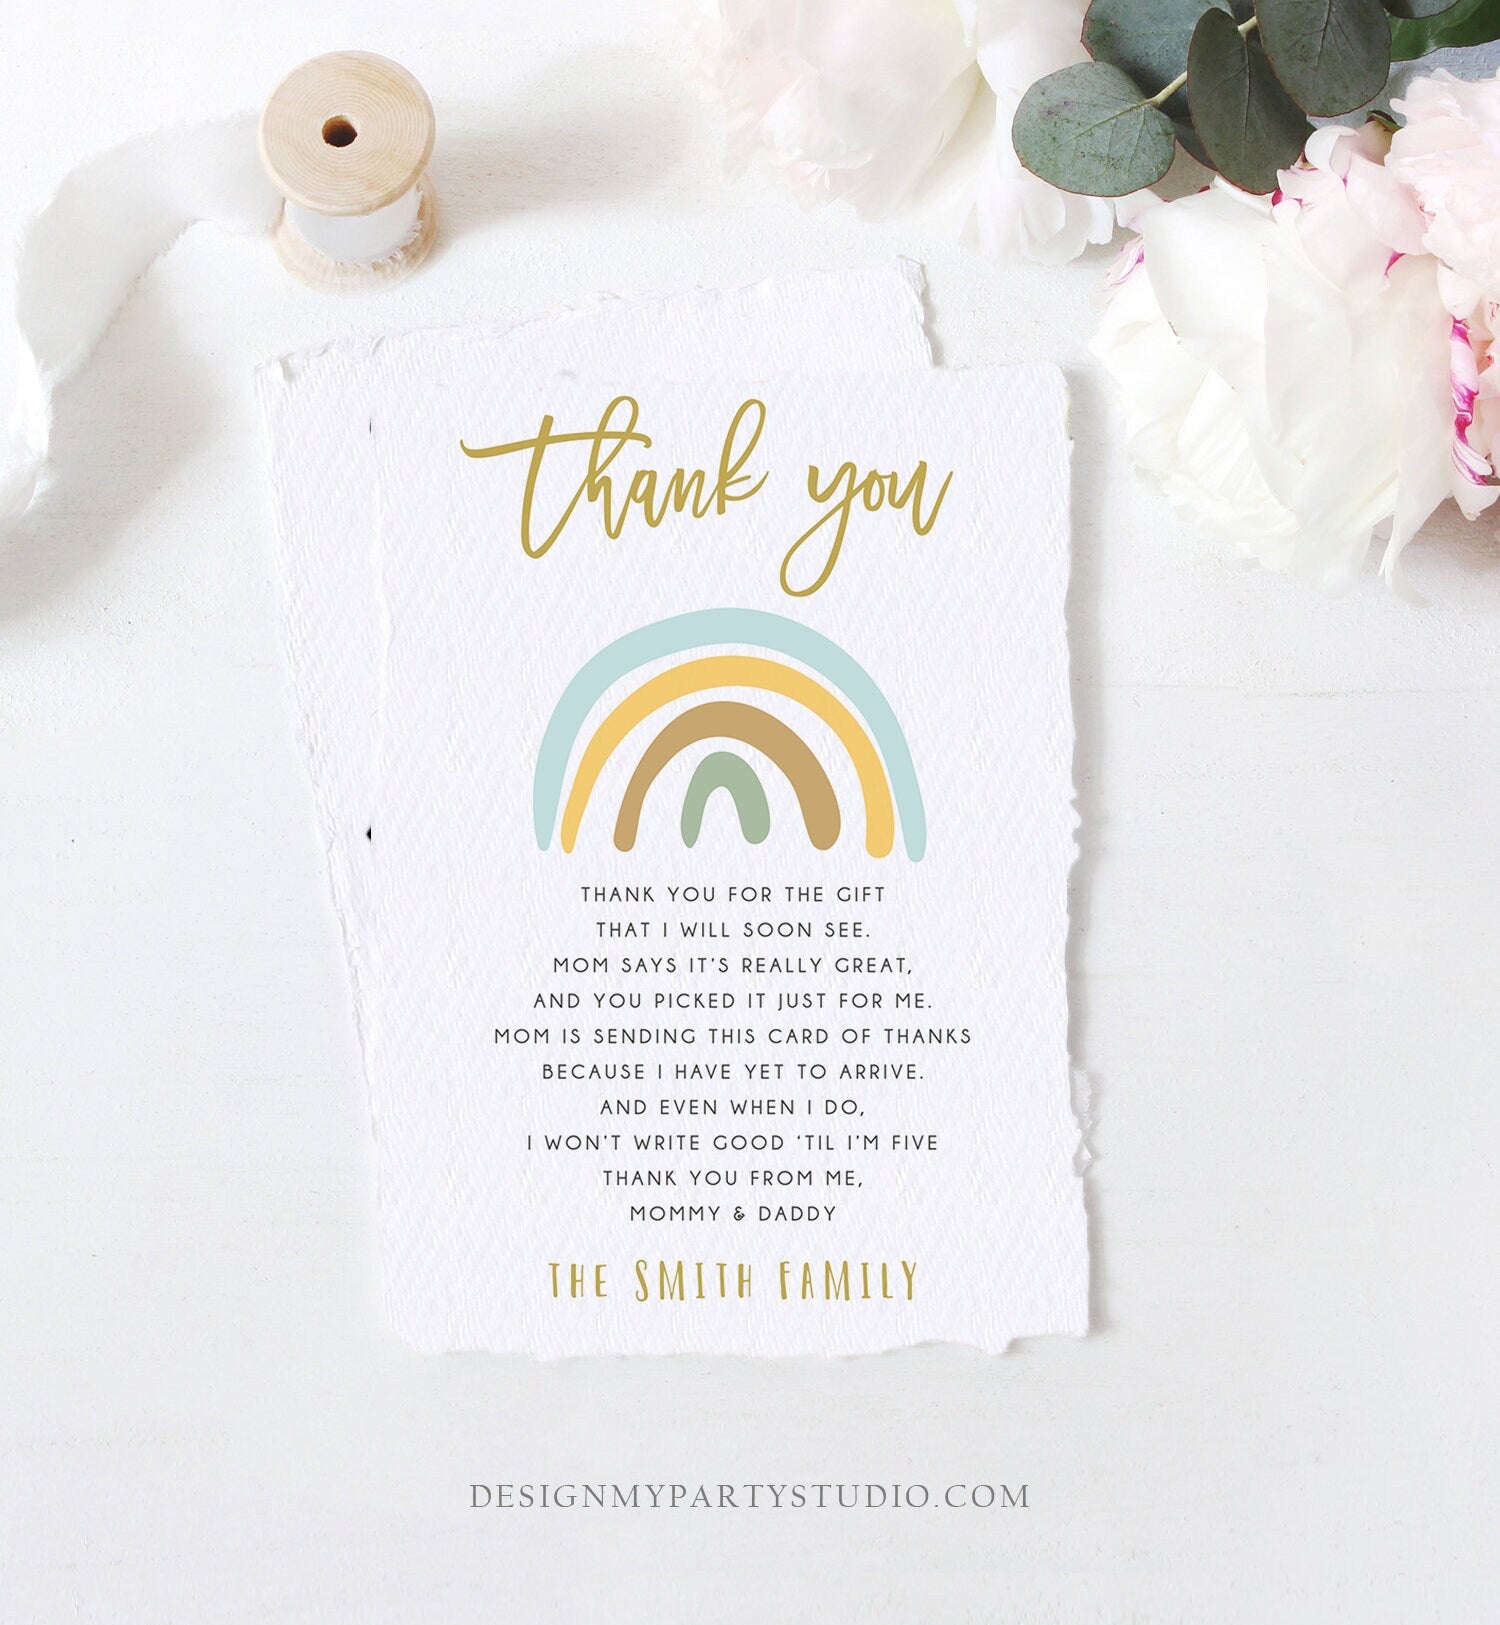 Editable Baby shower Thank you note Rainbow Thank You Rustic Boy Baby Shower Pastel Neutral Birthday Template Instant Download Corjl 0331